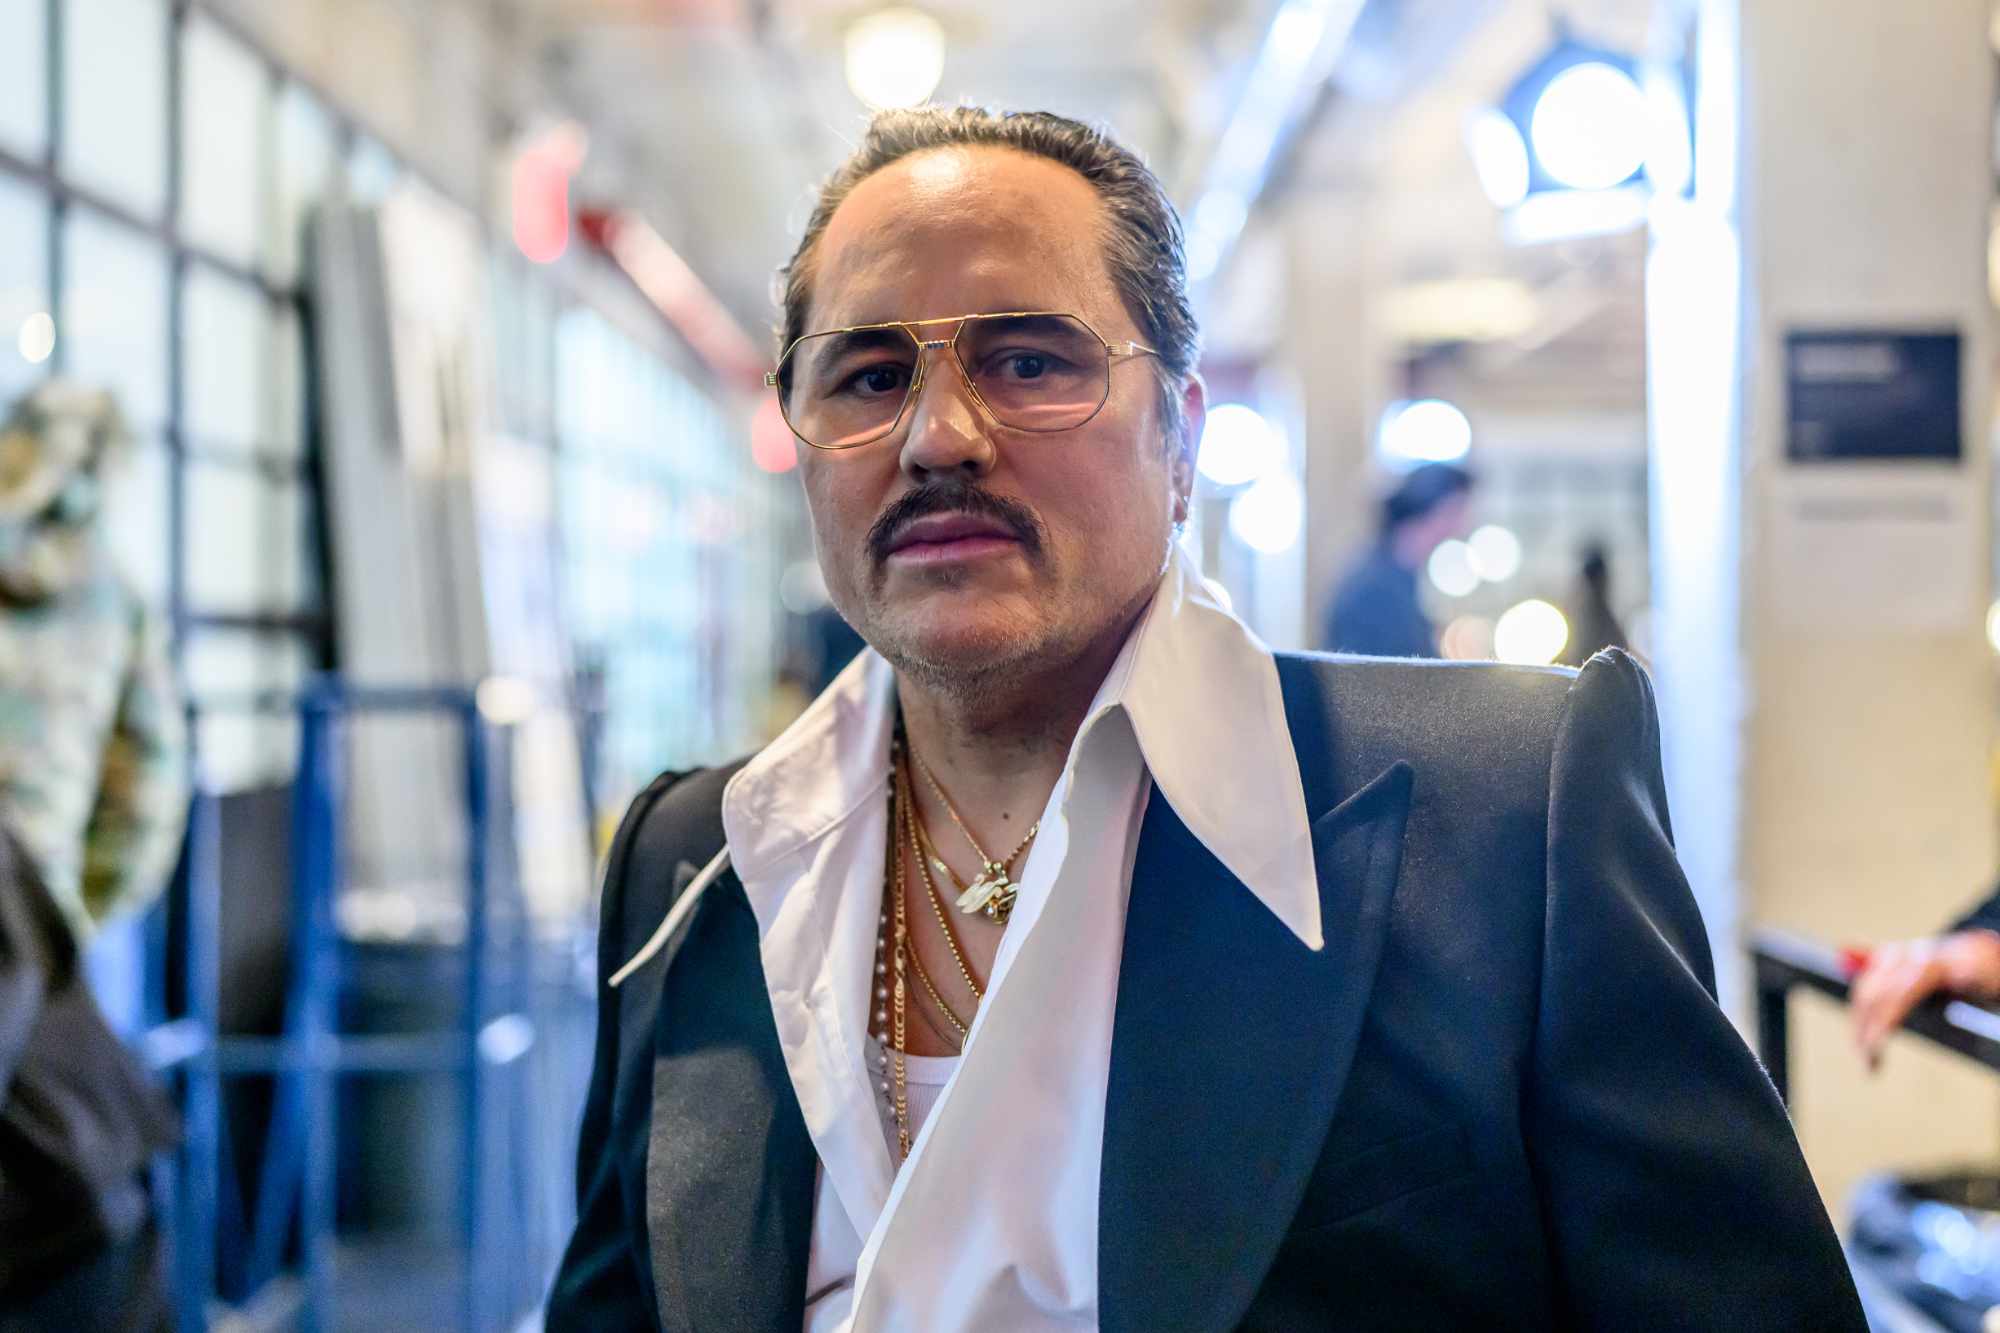 Designer Willy Chavarria, seen wearing a blue jacket and white shirt backstage